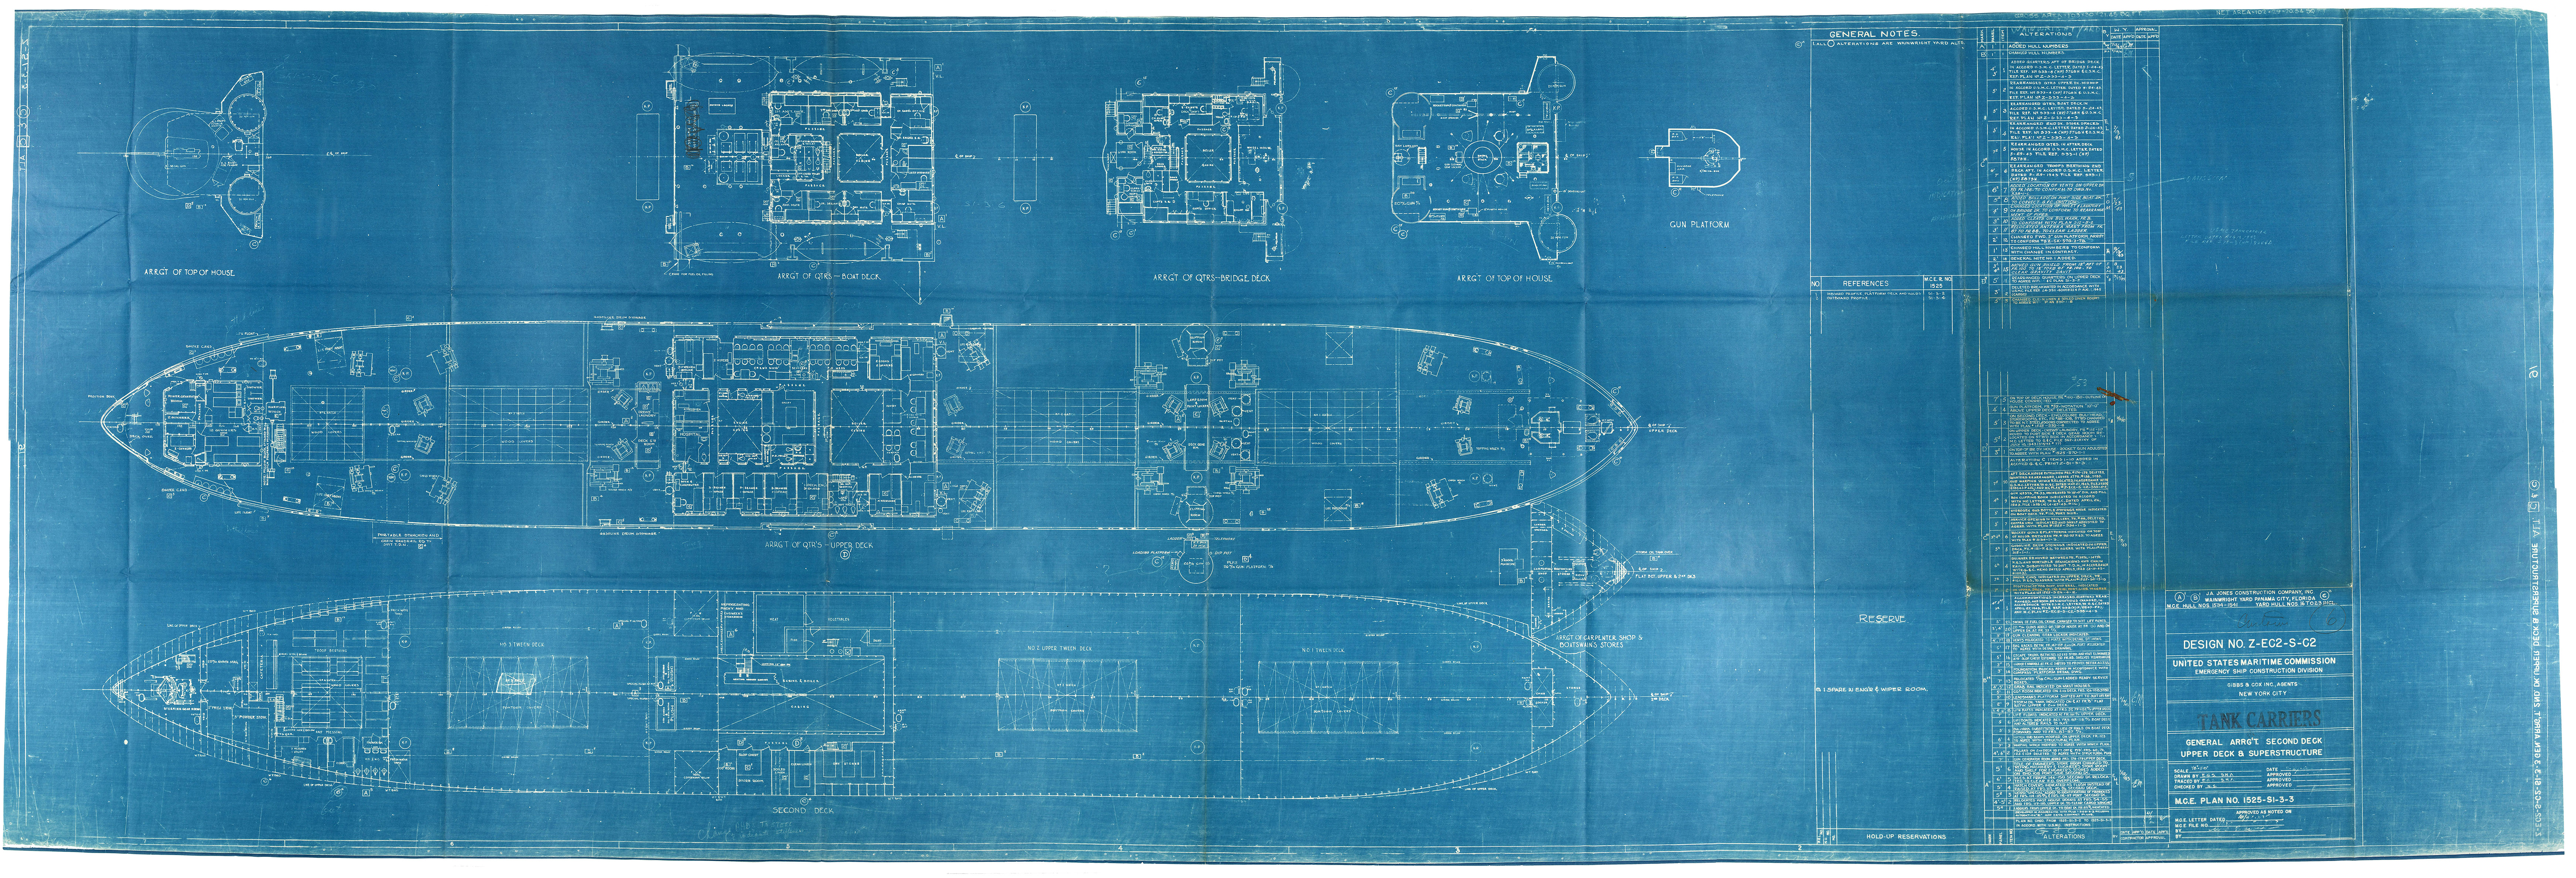 Drawings and Plans of Liberty Ships